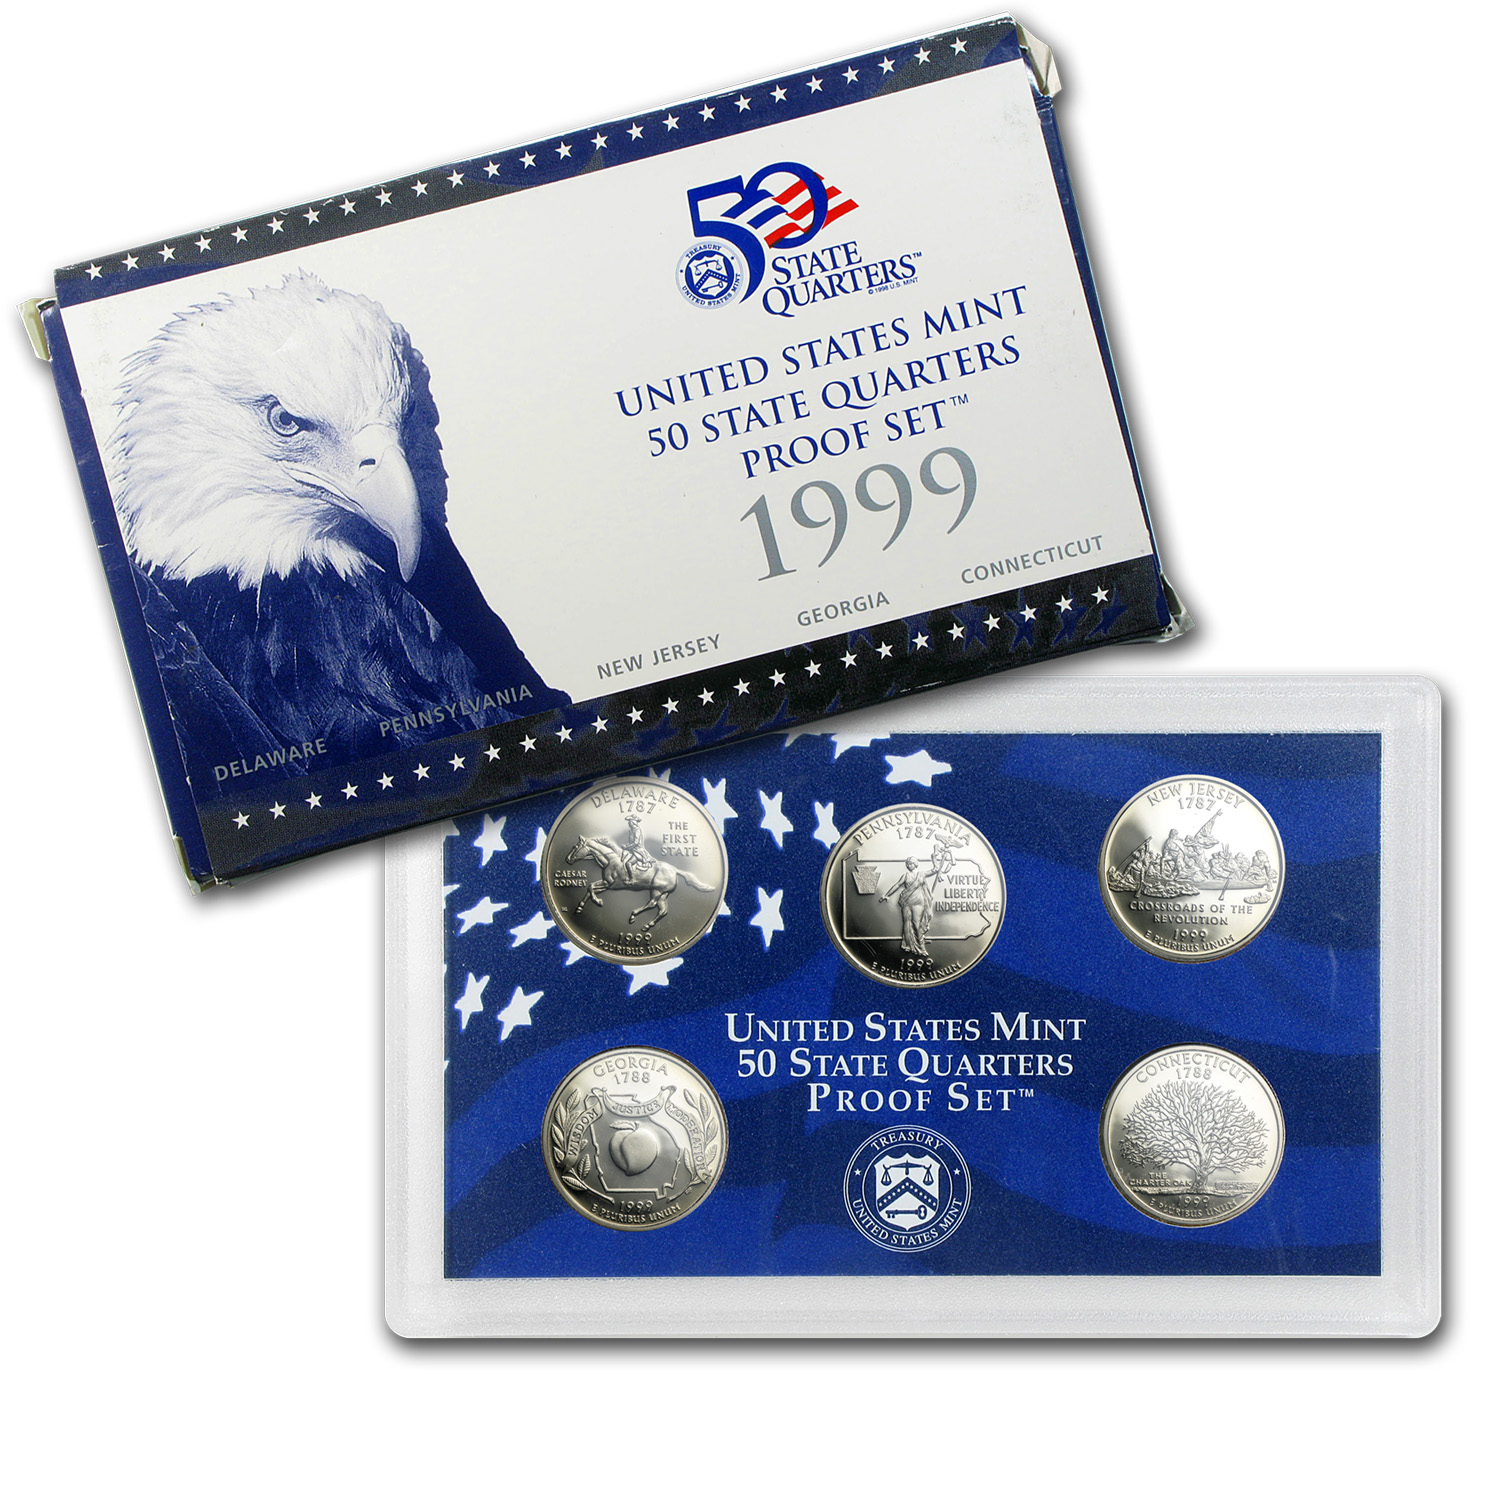 Details about   2003 United States Mint 50 State Quarters Proof Set S834 *Free Shipping Deal* 